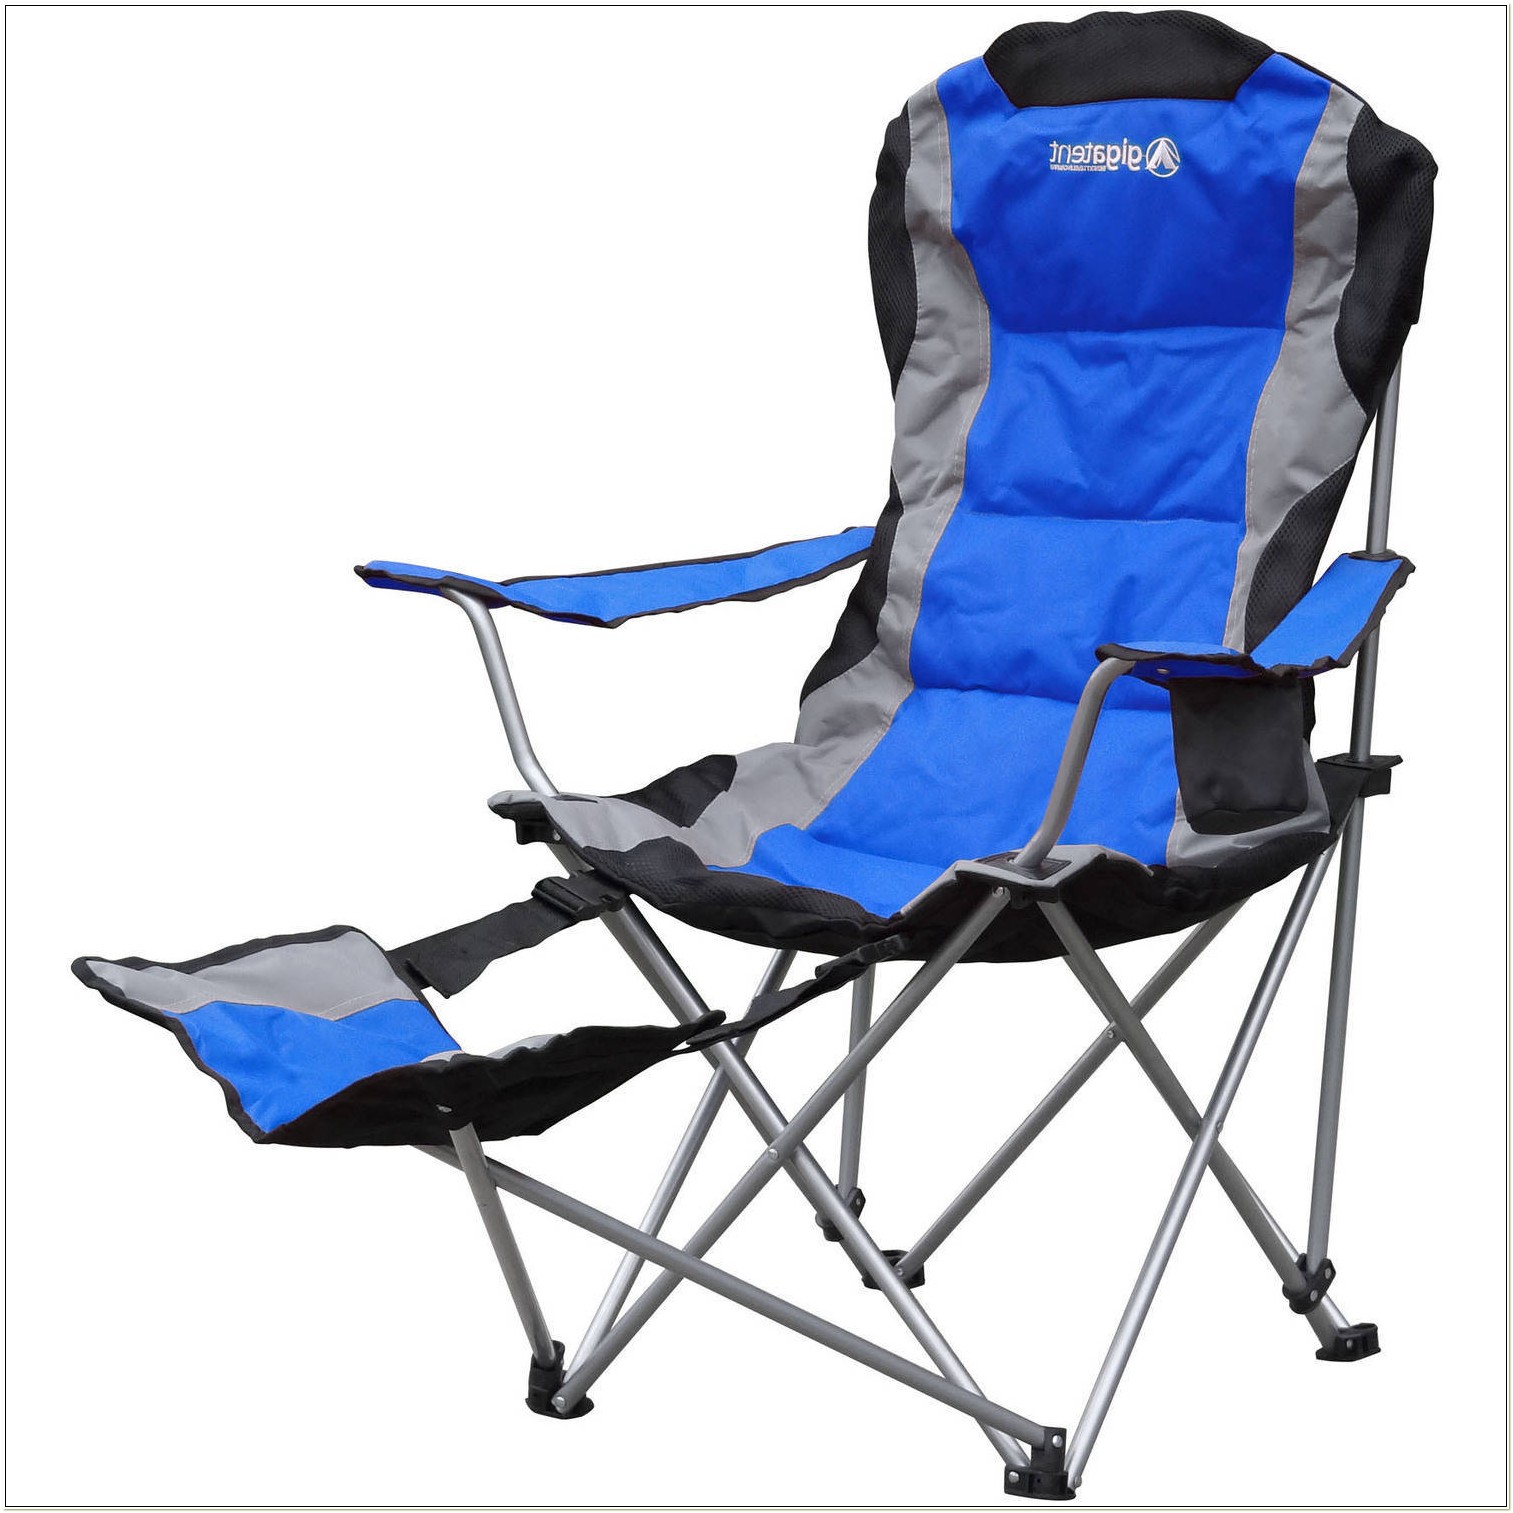 Camping Chair With Footrest Walmart - Chairs : Home Decorating Ideas #